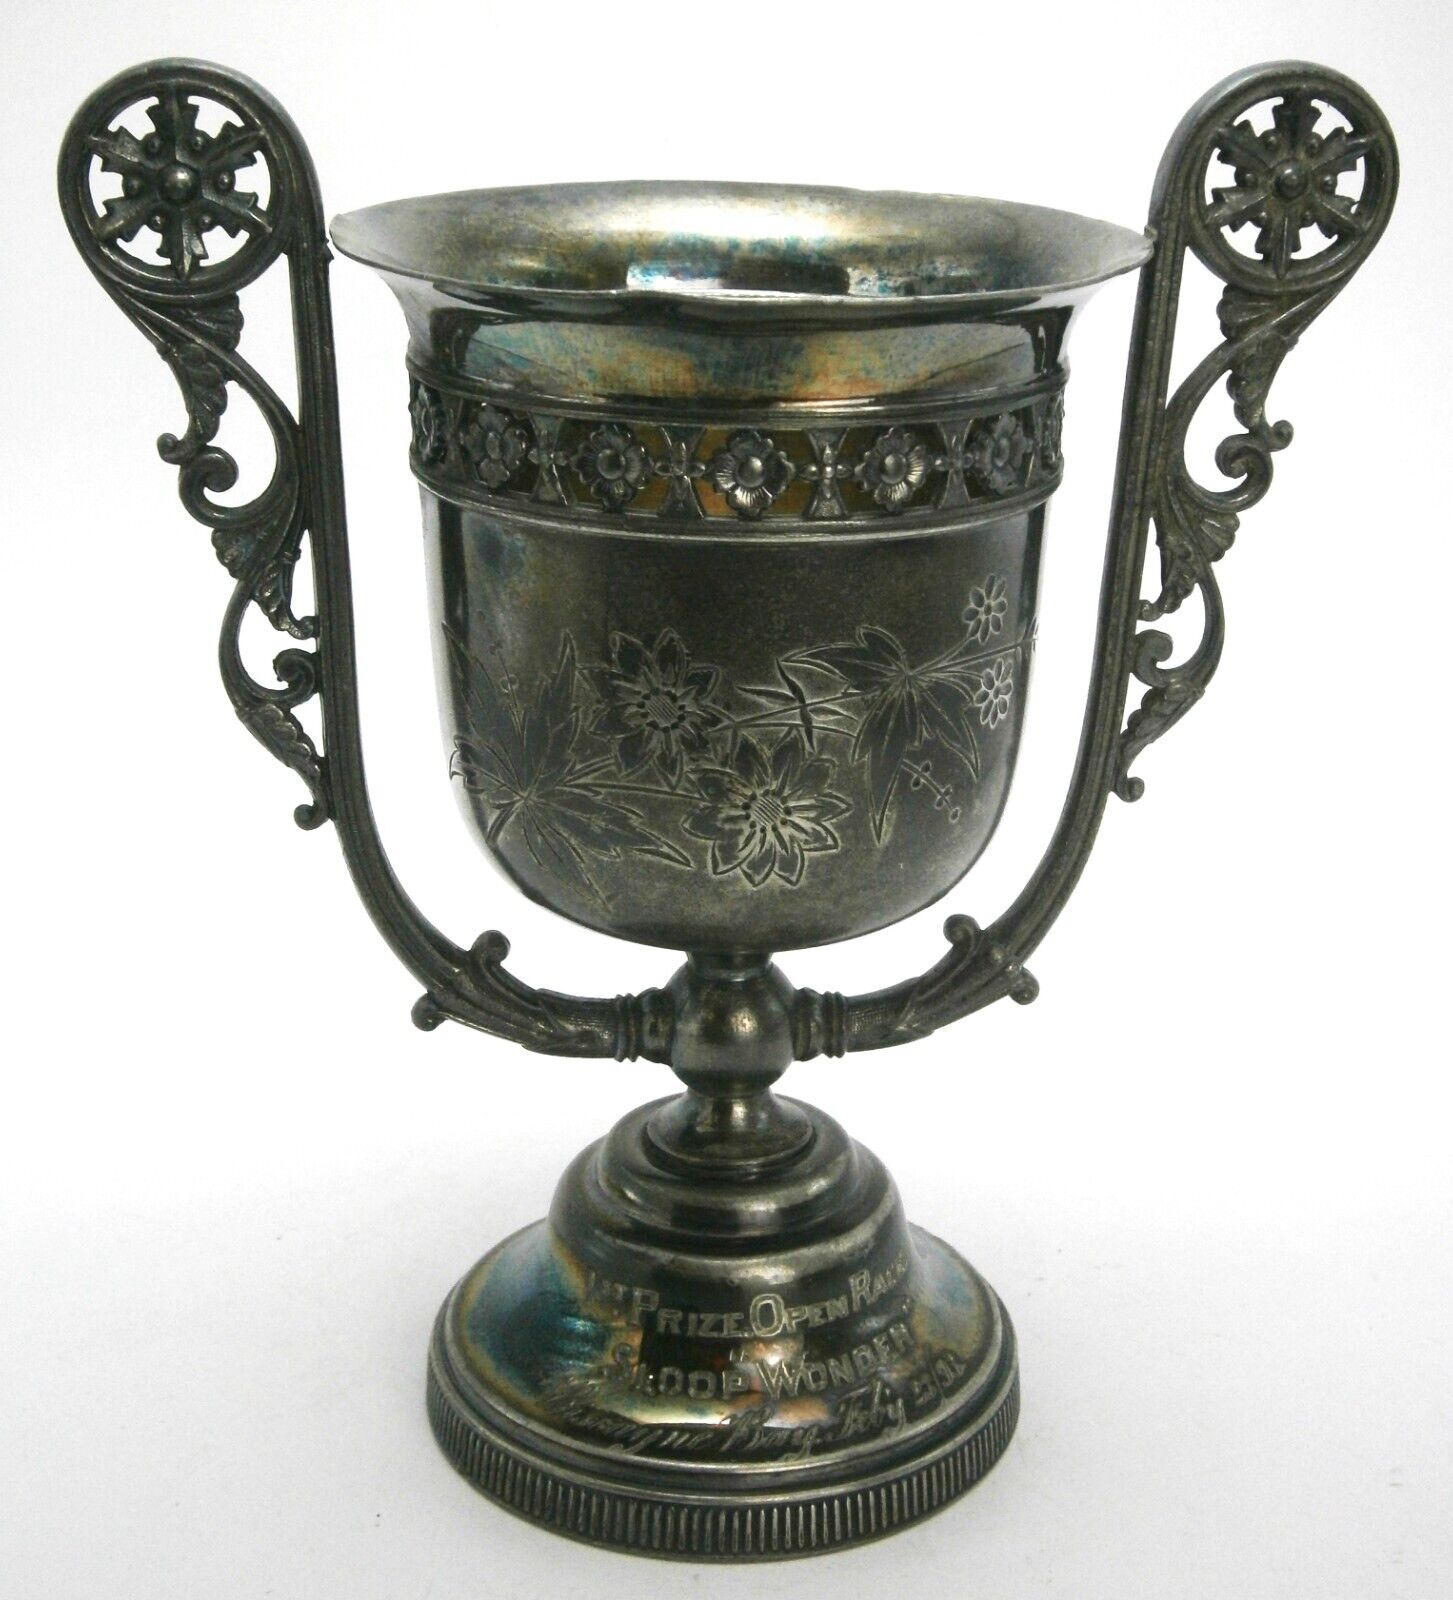 TUFTS 1893 1st Place Loving Cup Trophy by the Sloop \